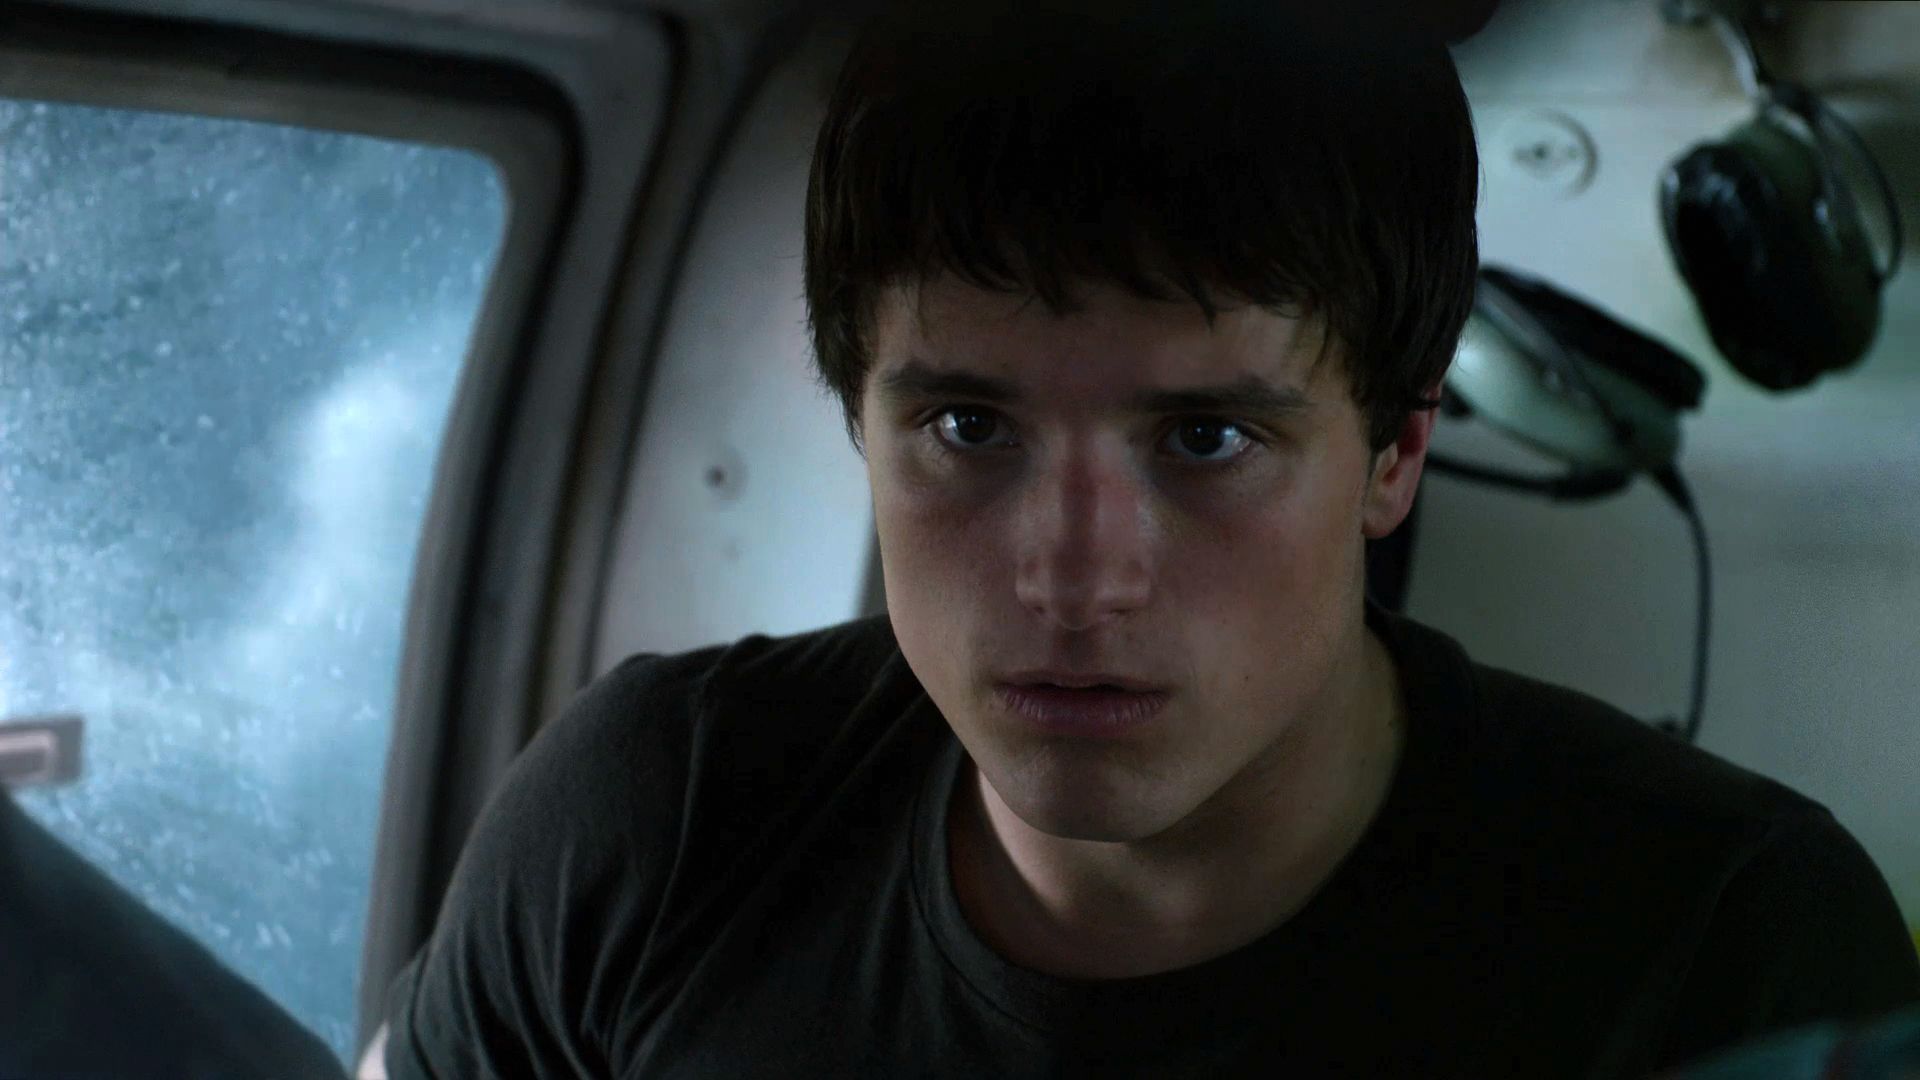 Josh Hutcherson returns as Sean Anderson in Journey 2: The Mysterious Island{63} Totally. It's really fun. We've been covered in mud now for most of the entire movie, which sounds like fun at the beginning, but then after about day thirty of being in mud it's like, 'I'm sort of over it.' But we've been filming in all these beautiful places and it's usually really nice out. For me, I'm personally a huge fan of rainy weather. So, I'm loving this right now. The whole movie crew hates it. I'm like, 